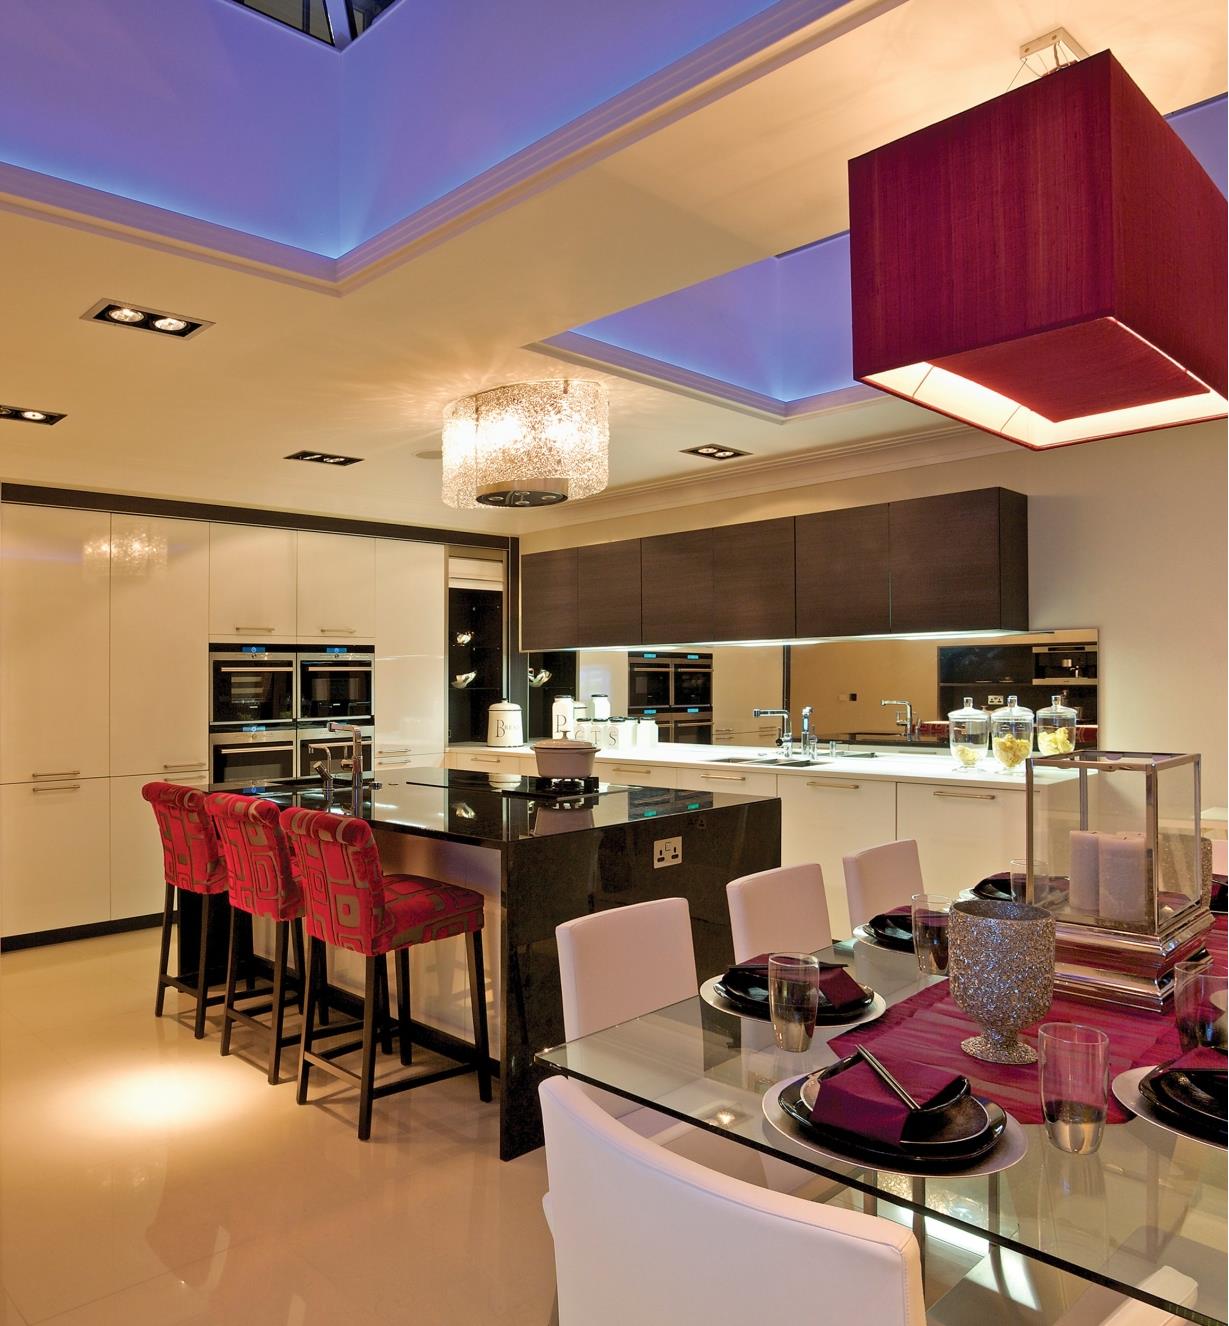 LED lights installed in a kitchen and dining room